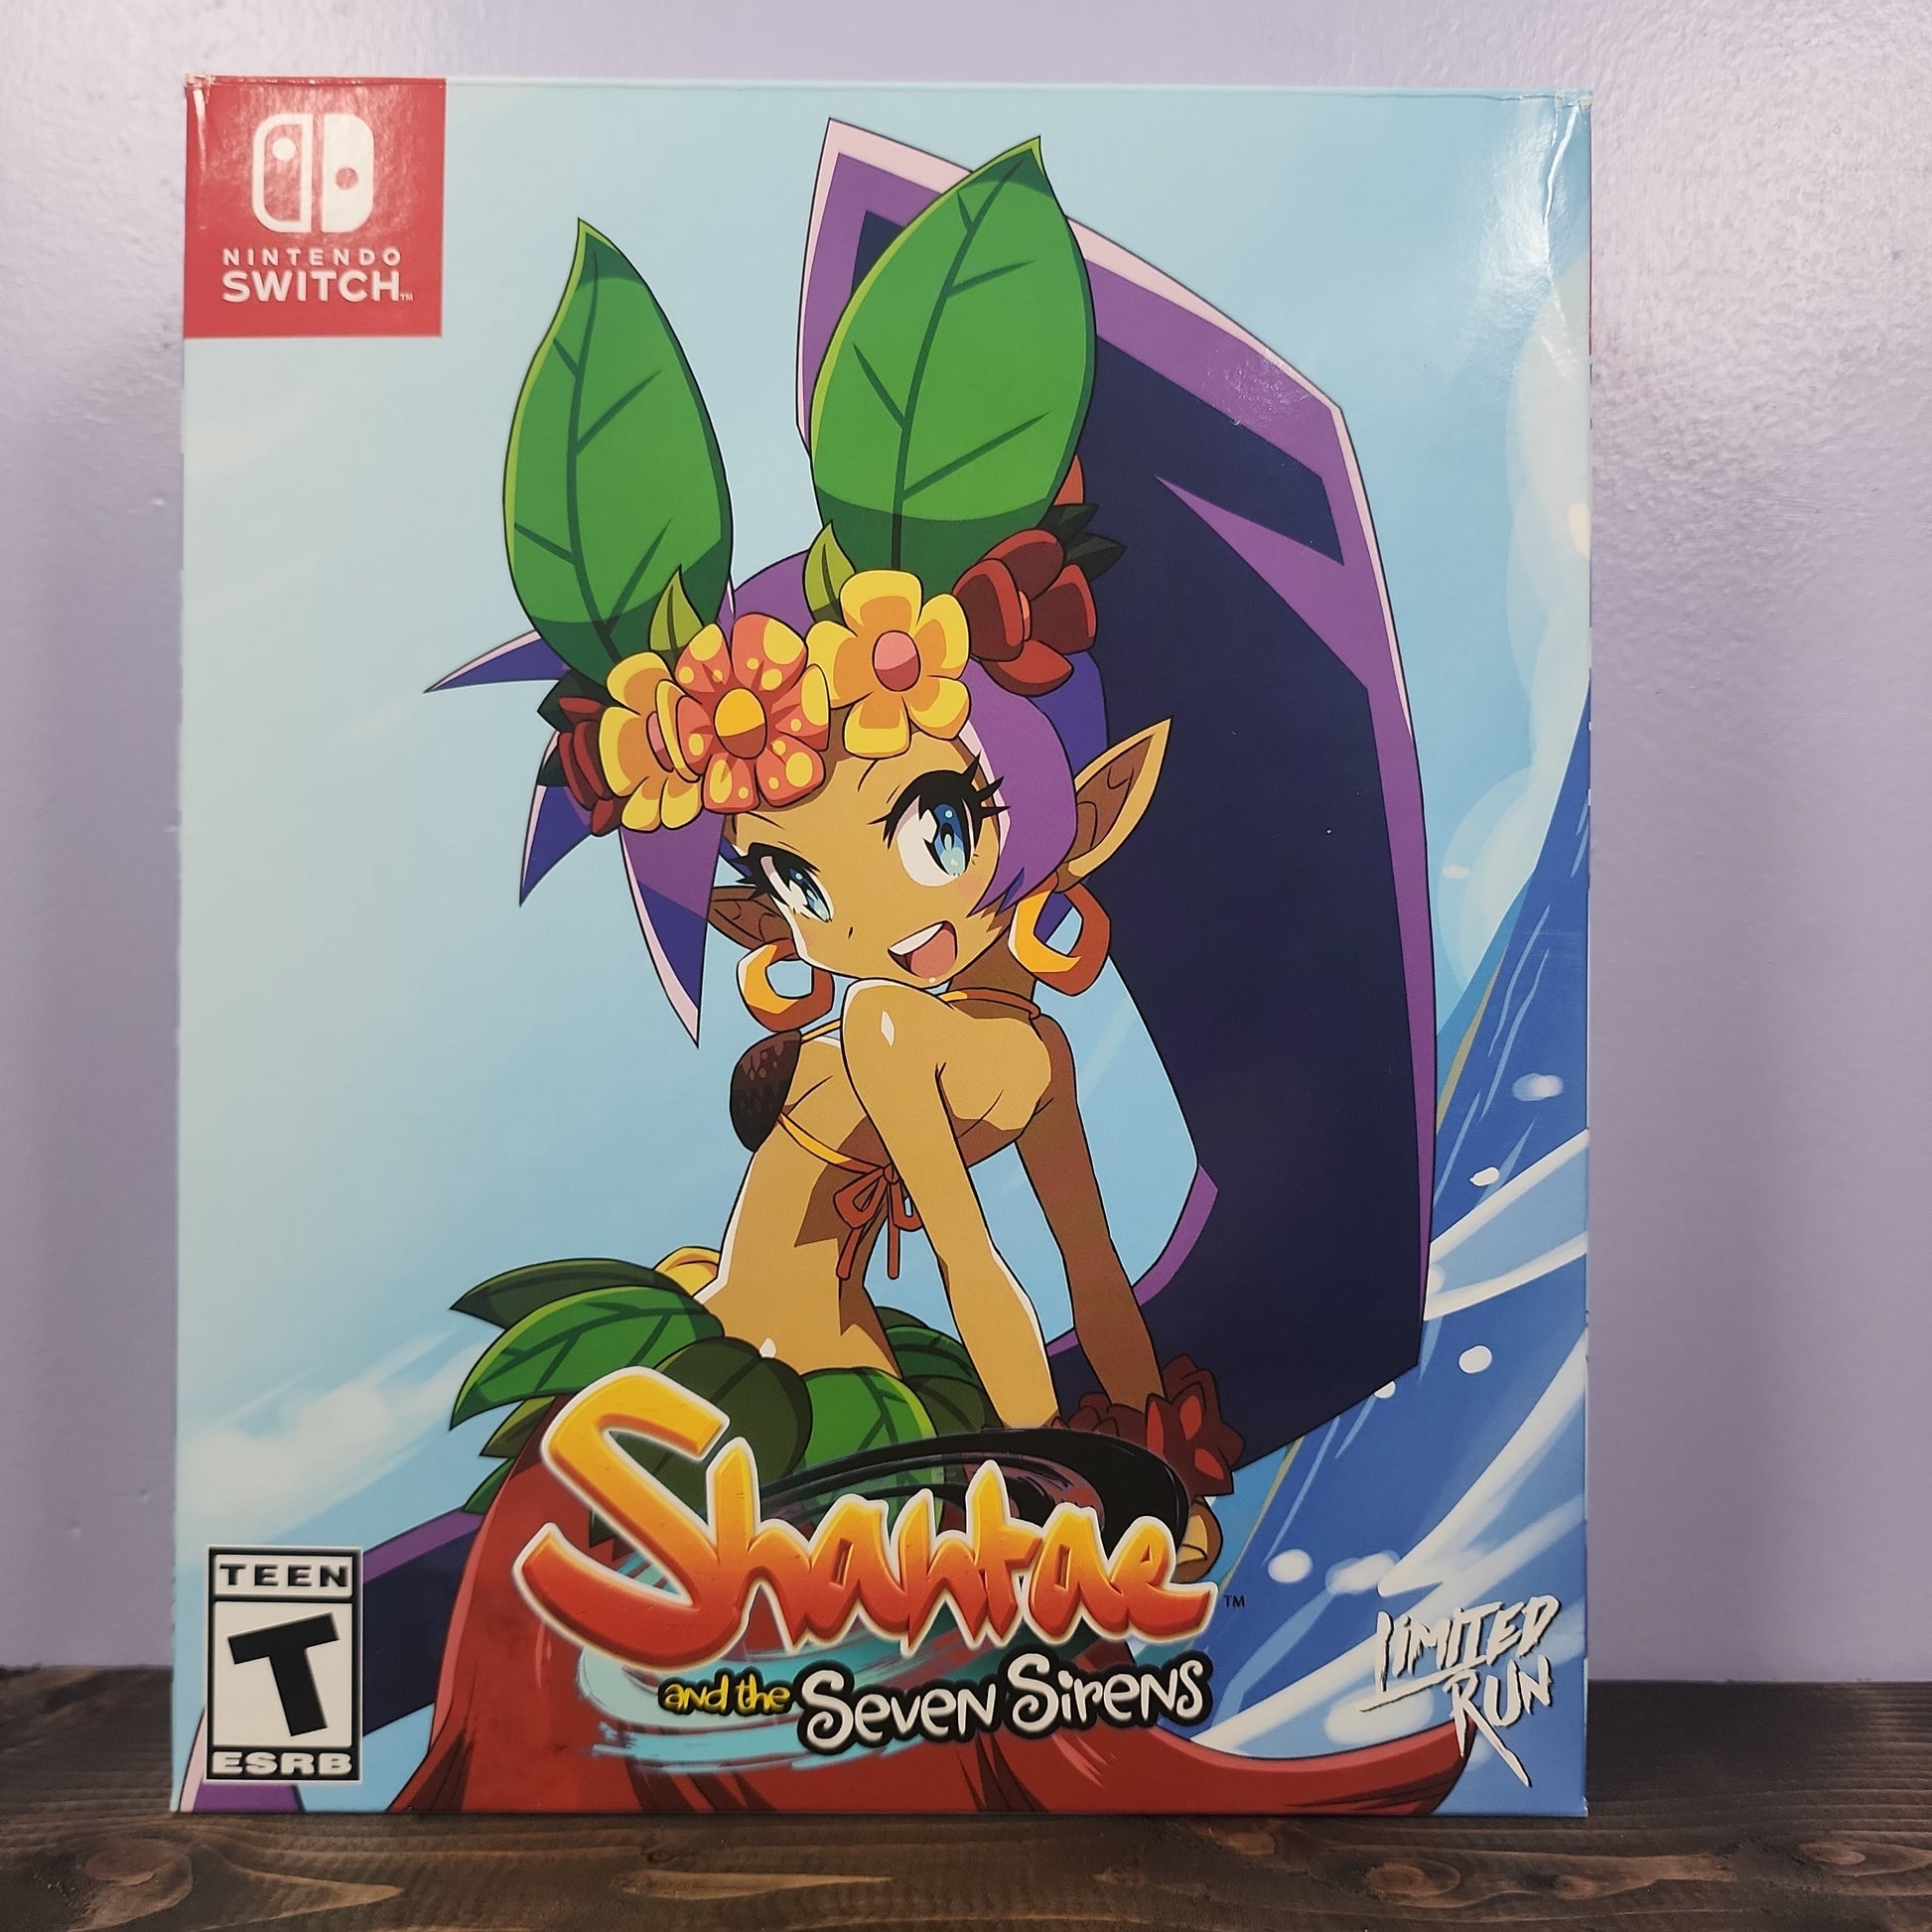 Nintendo Switch - Shantae and the Seven Sirens [Collector's Edition] Retrograde Collectibles 2D, Adventure, Collector's Edition, Female Protagonist, Limited Run, Metroidvania, Nintendo, Nintend Preowned Video Game 